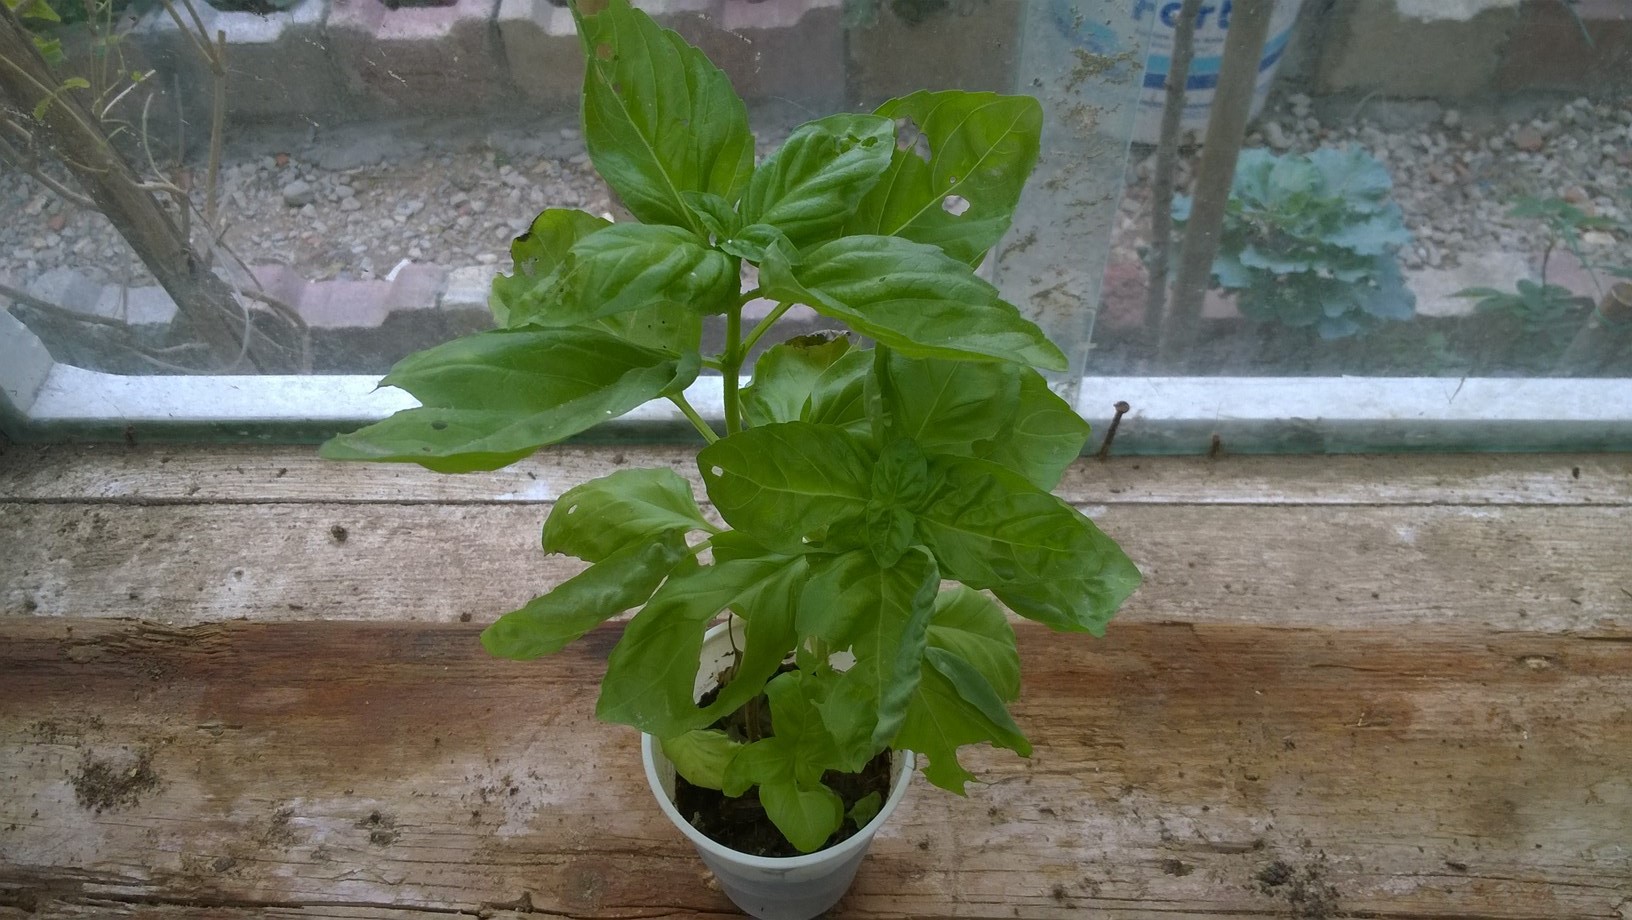 my sweet basil ready to be transplanted in my garden